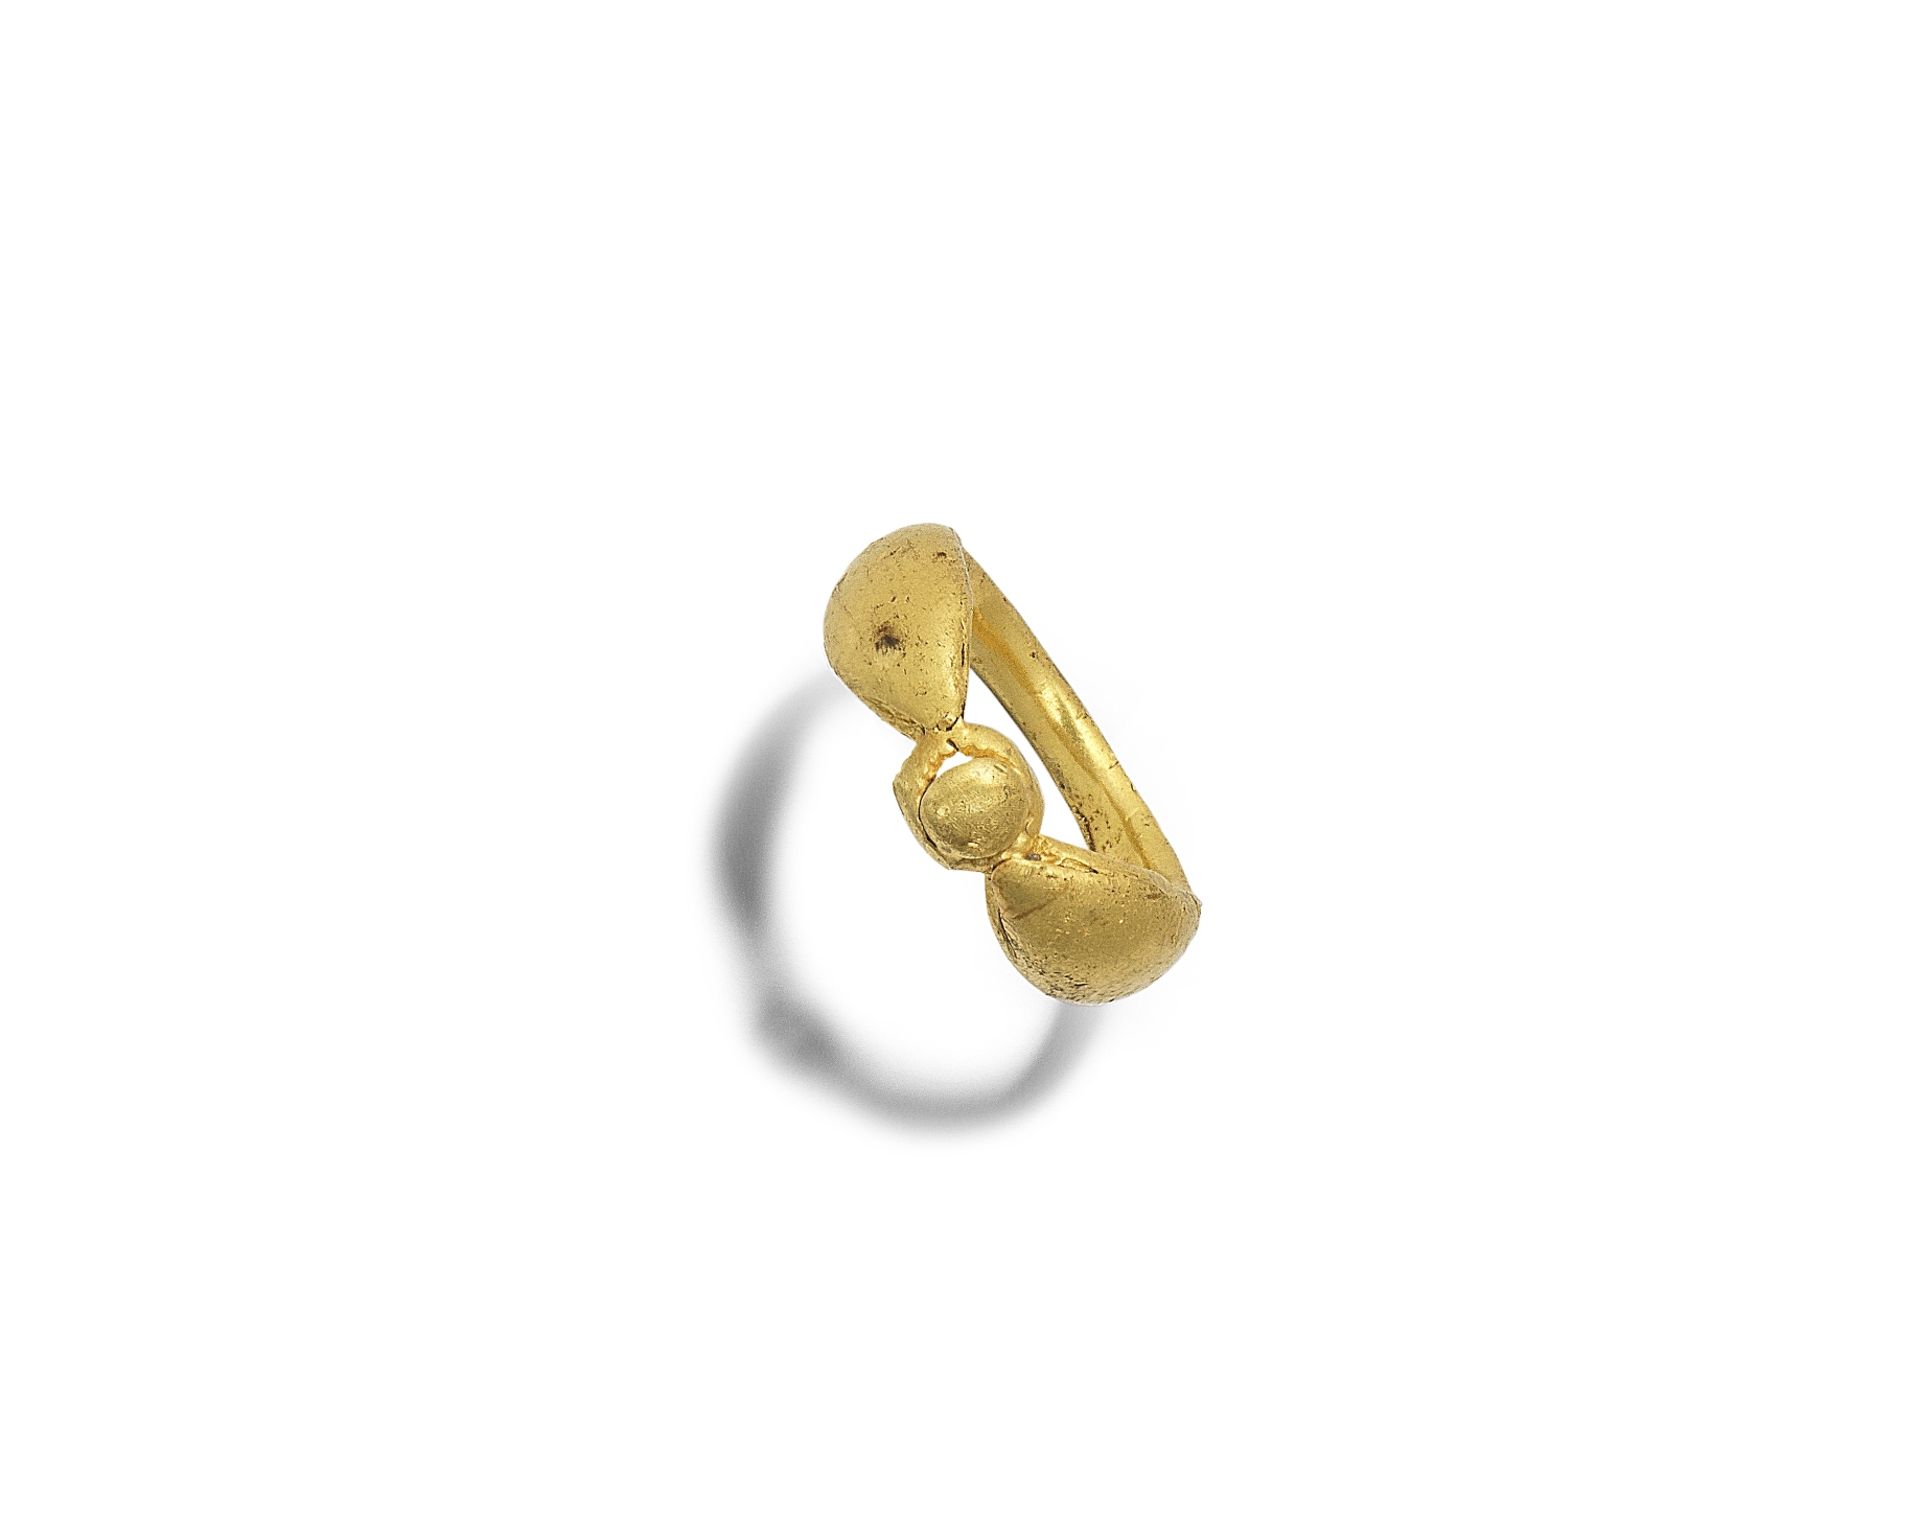 A small Roman gold ring